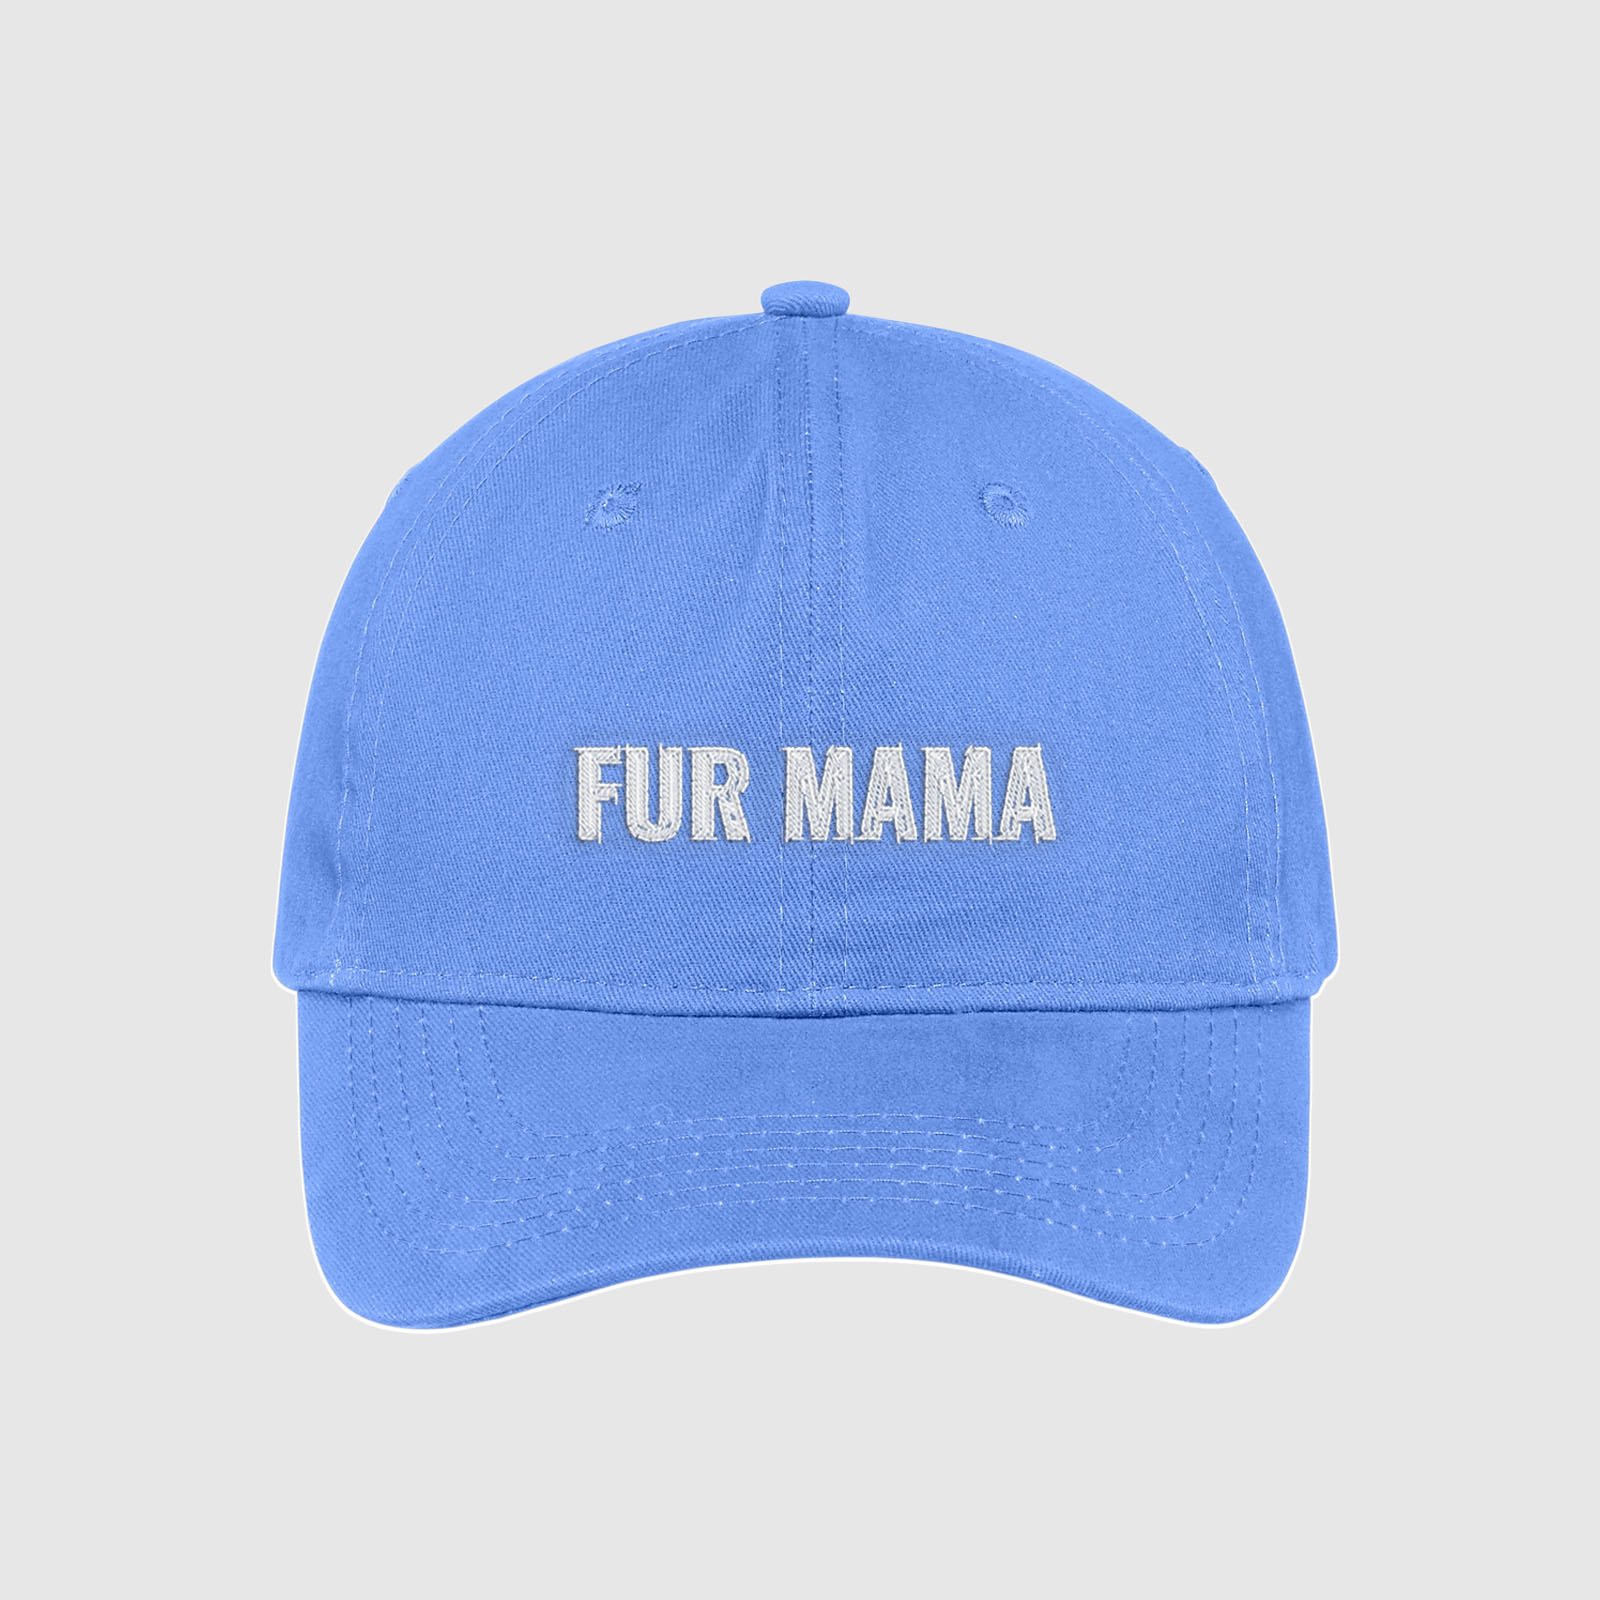 Carolina Blue Fur Mama dad Hat for dog moms embroidered with white text.